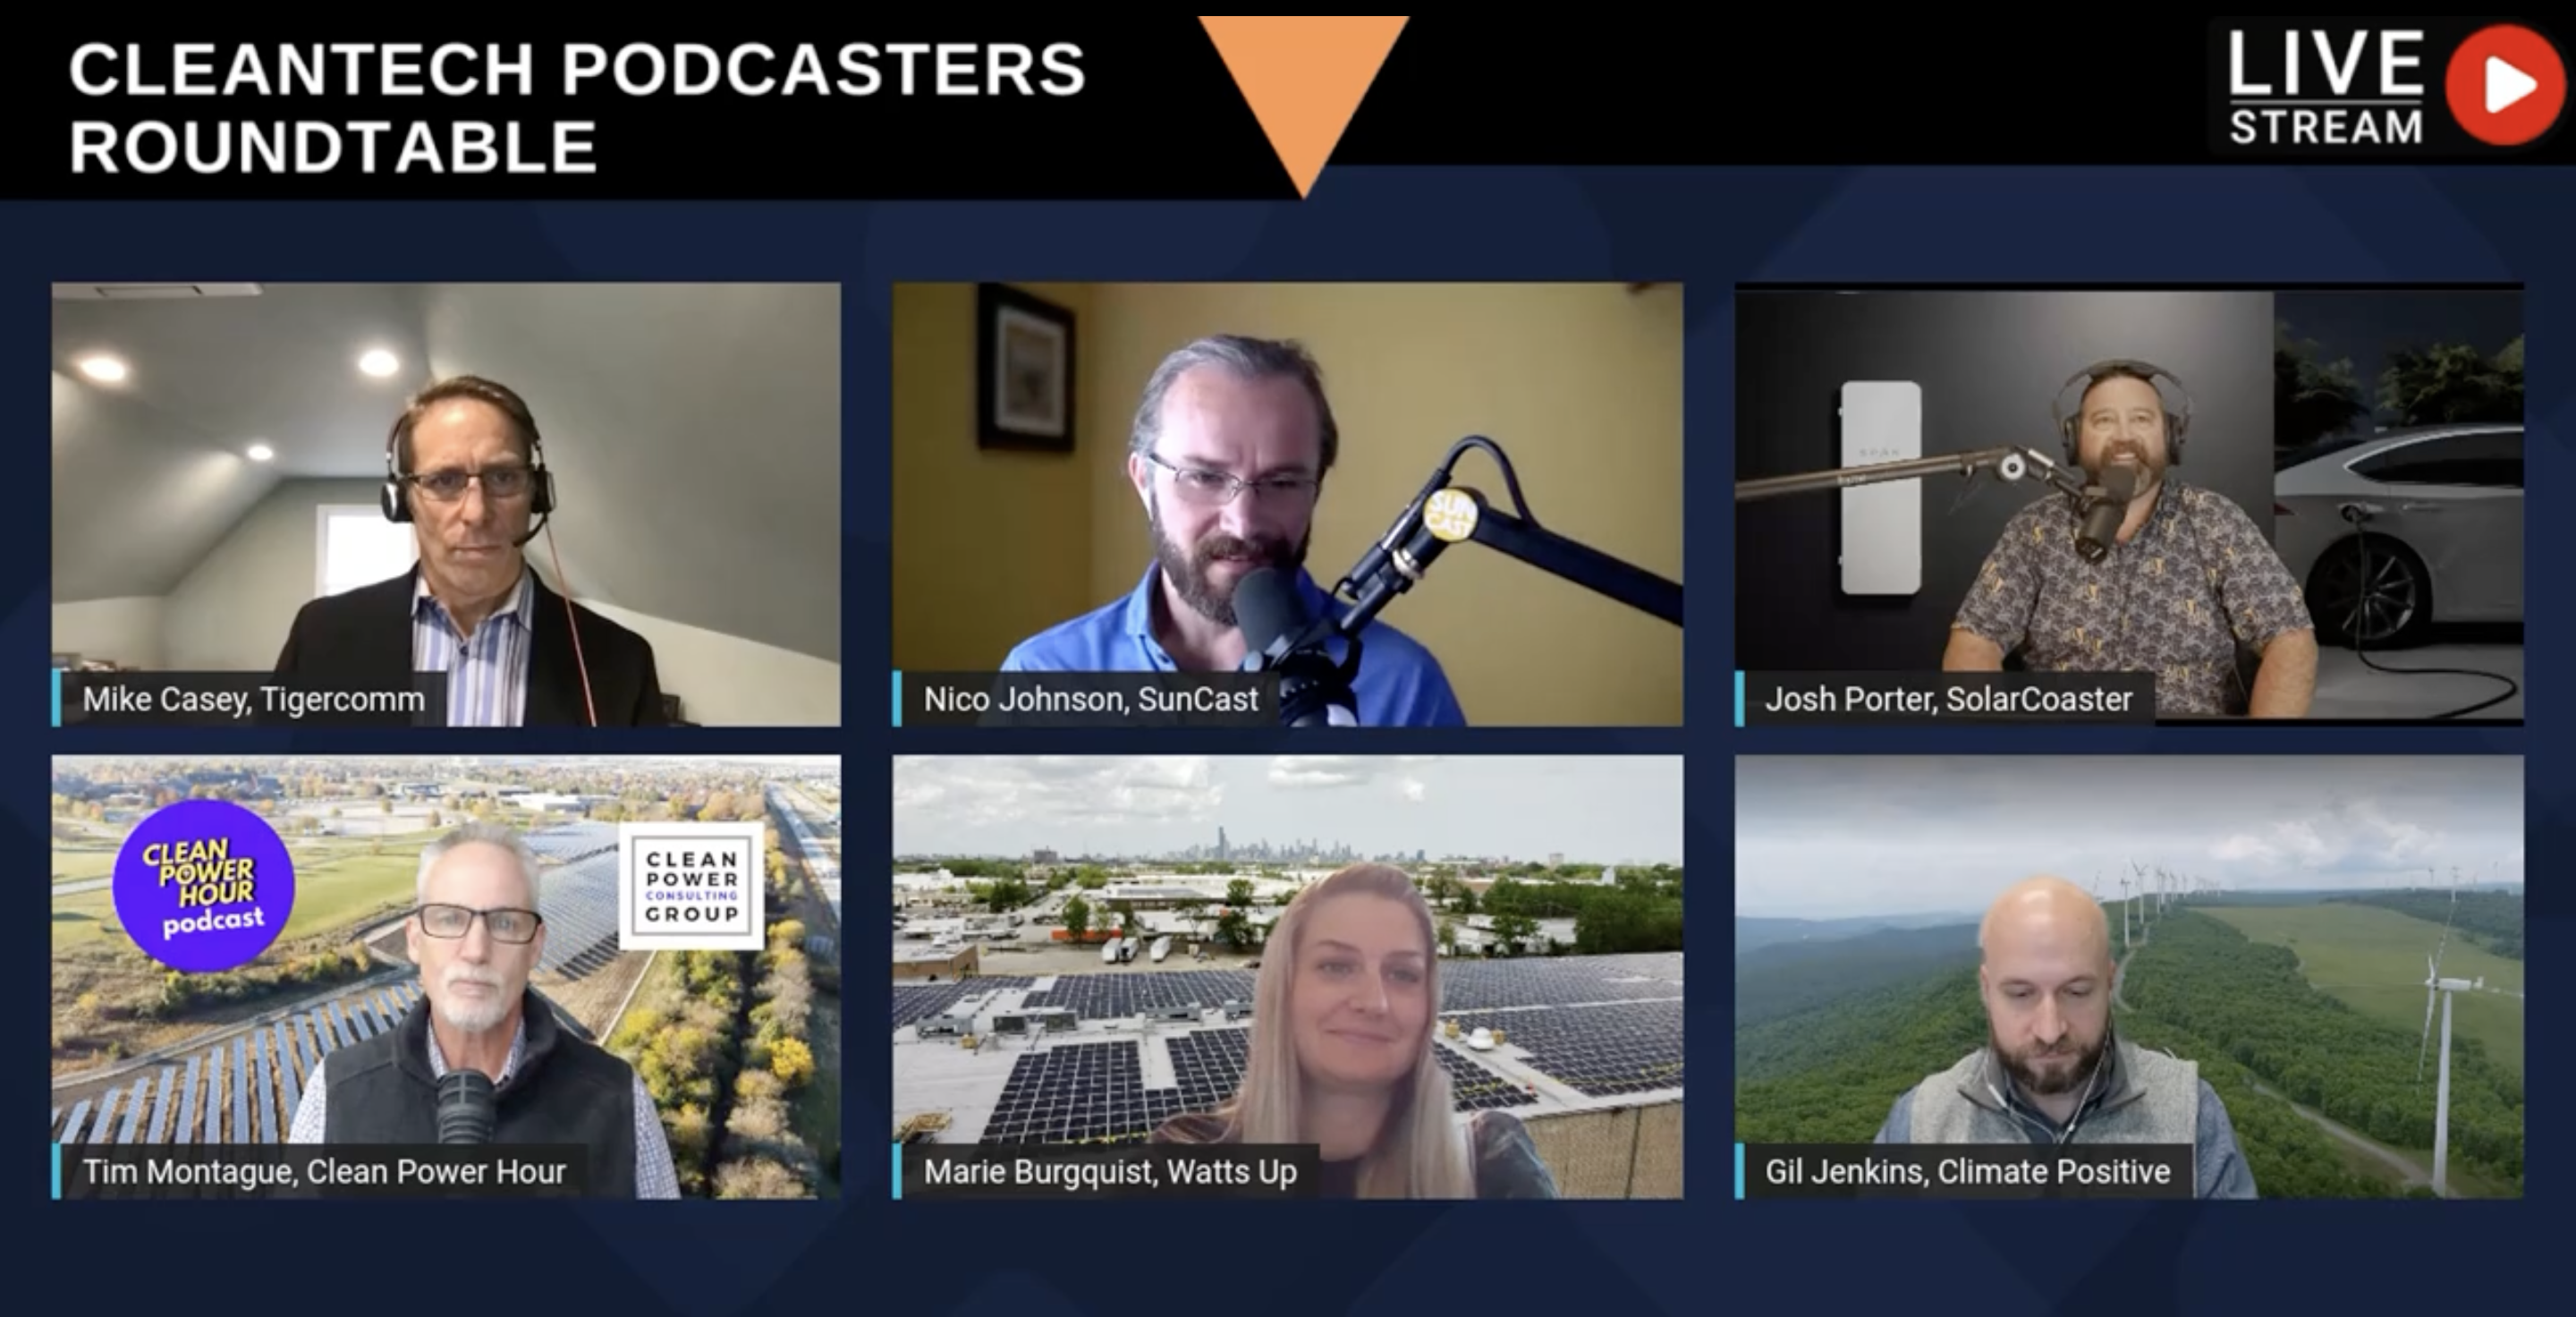 Episode 4 - Cleantech Podcasters Roundtable by Tigercomm & SunCast Media